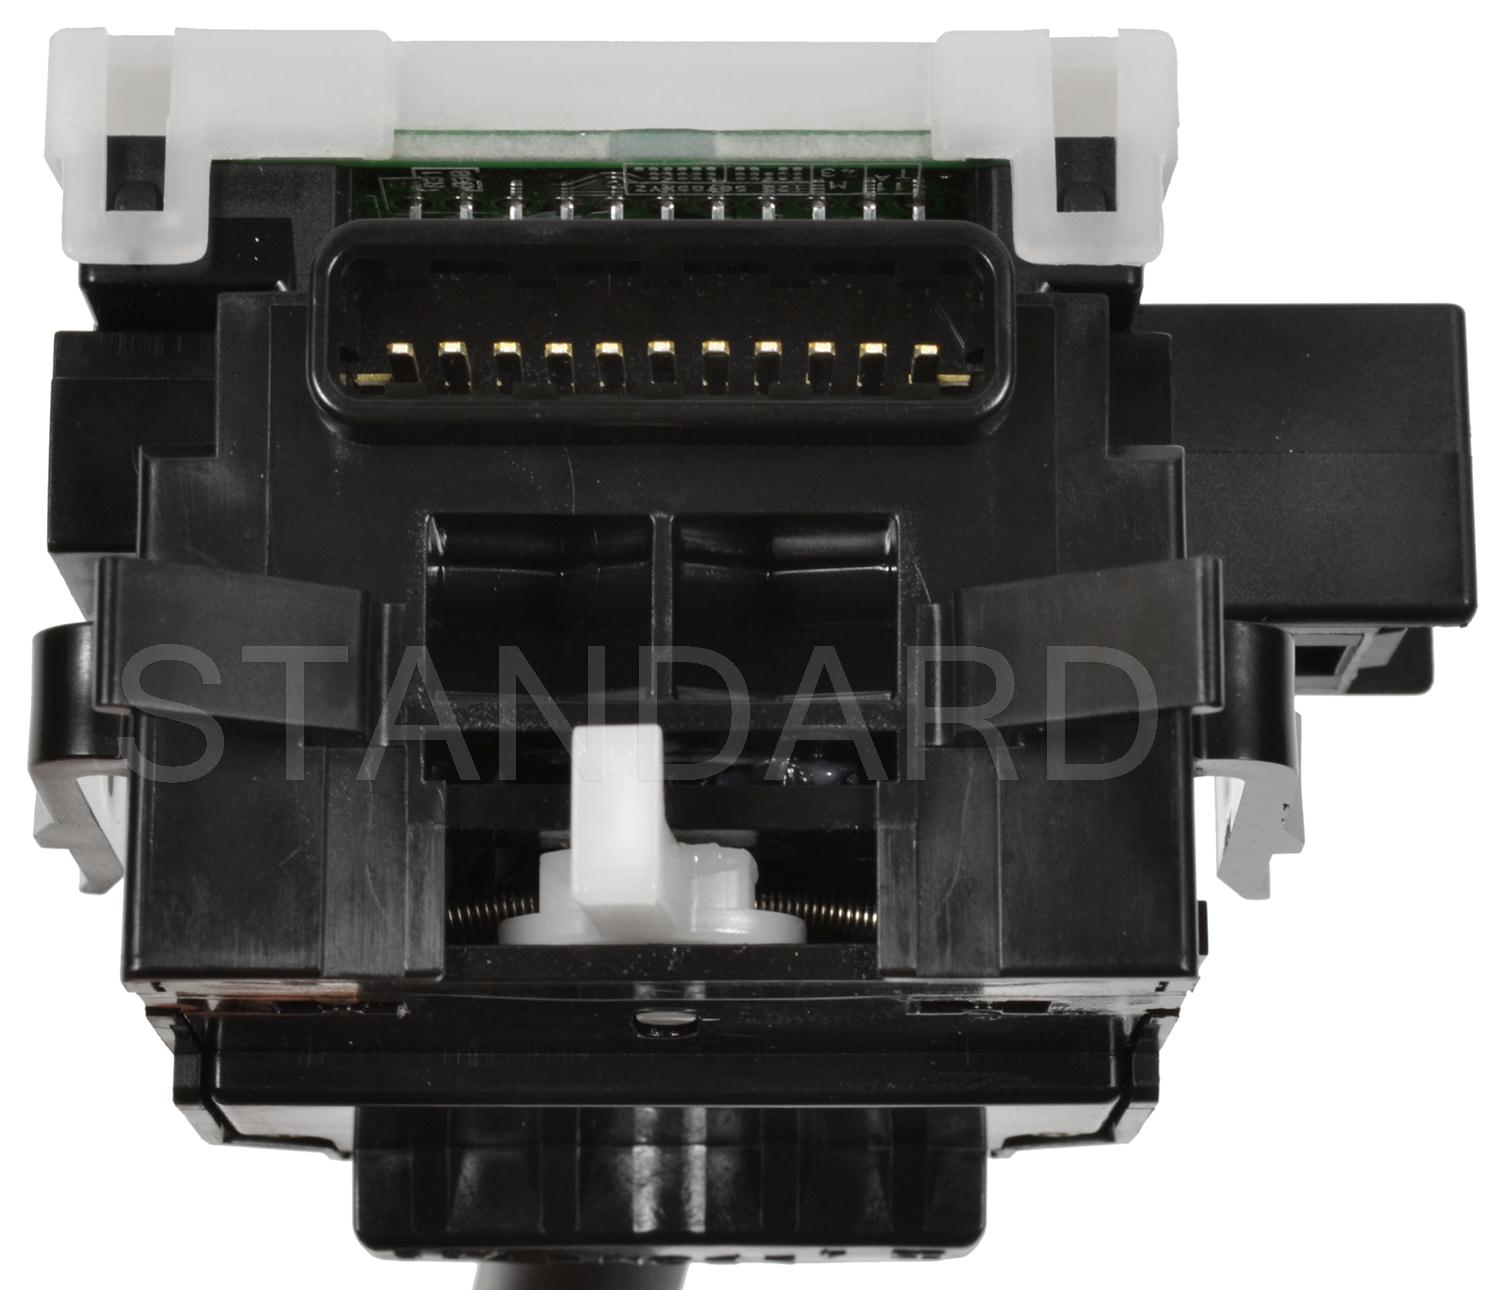 Picture of Standard Motor Products CBS1979 Standard Motor Products Cbs-1979 Combination Switch